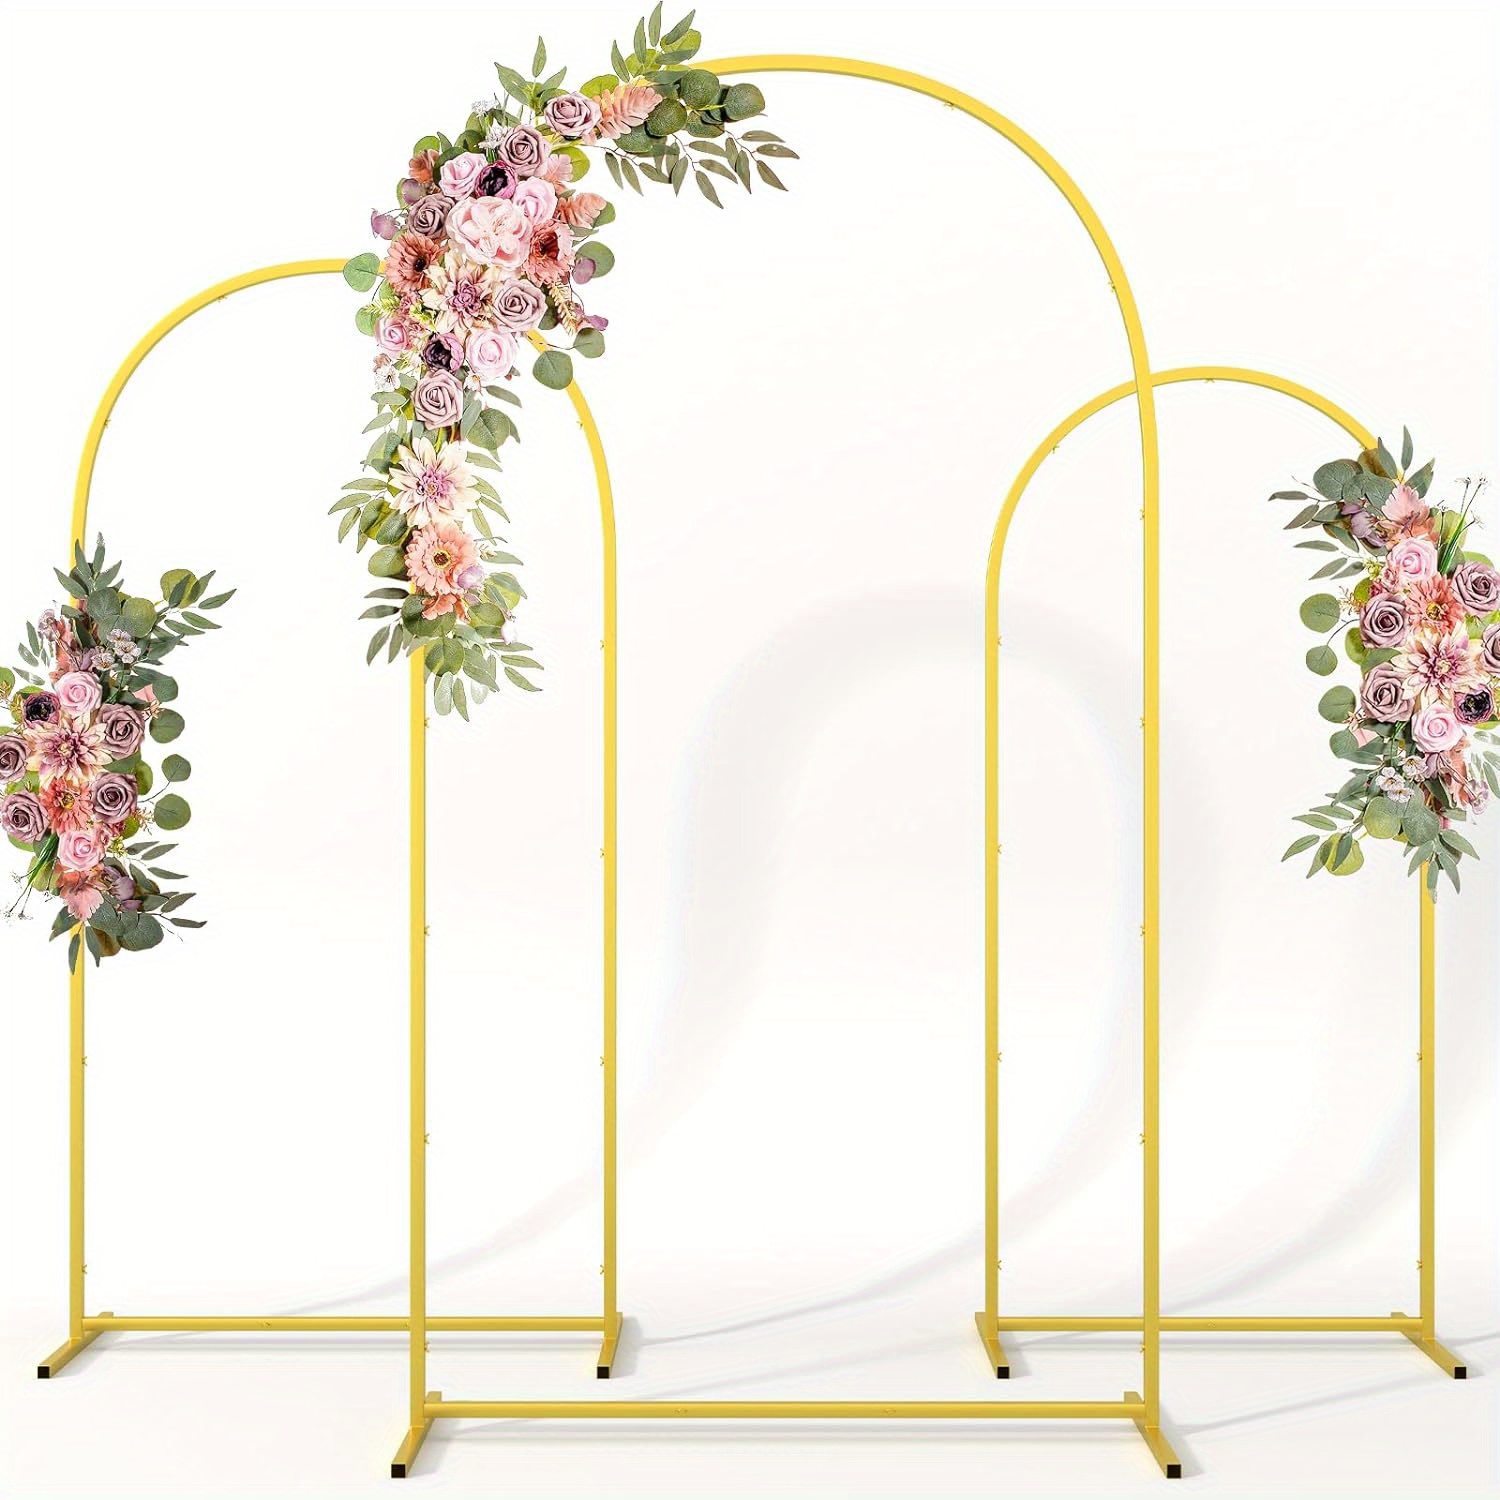 

Metal Arch Backdrop Stand 7.3ft& 6.6ft& 6.6ft Set Of 3, Wedding Arch Backdrop Stand For Wedding Ceremony Baby Shower, Outdoor Indoor Birthday Party, Garden Floral Balloon Arch Decoration, Gold